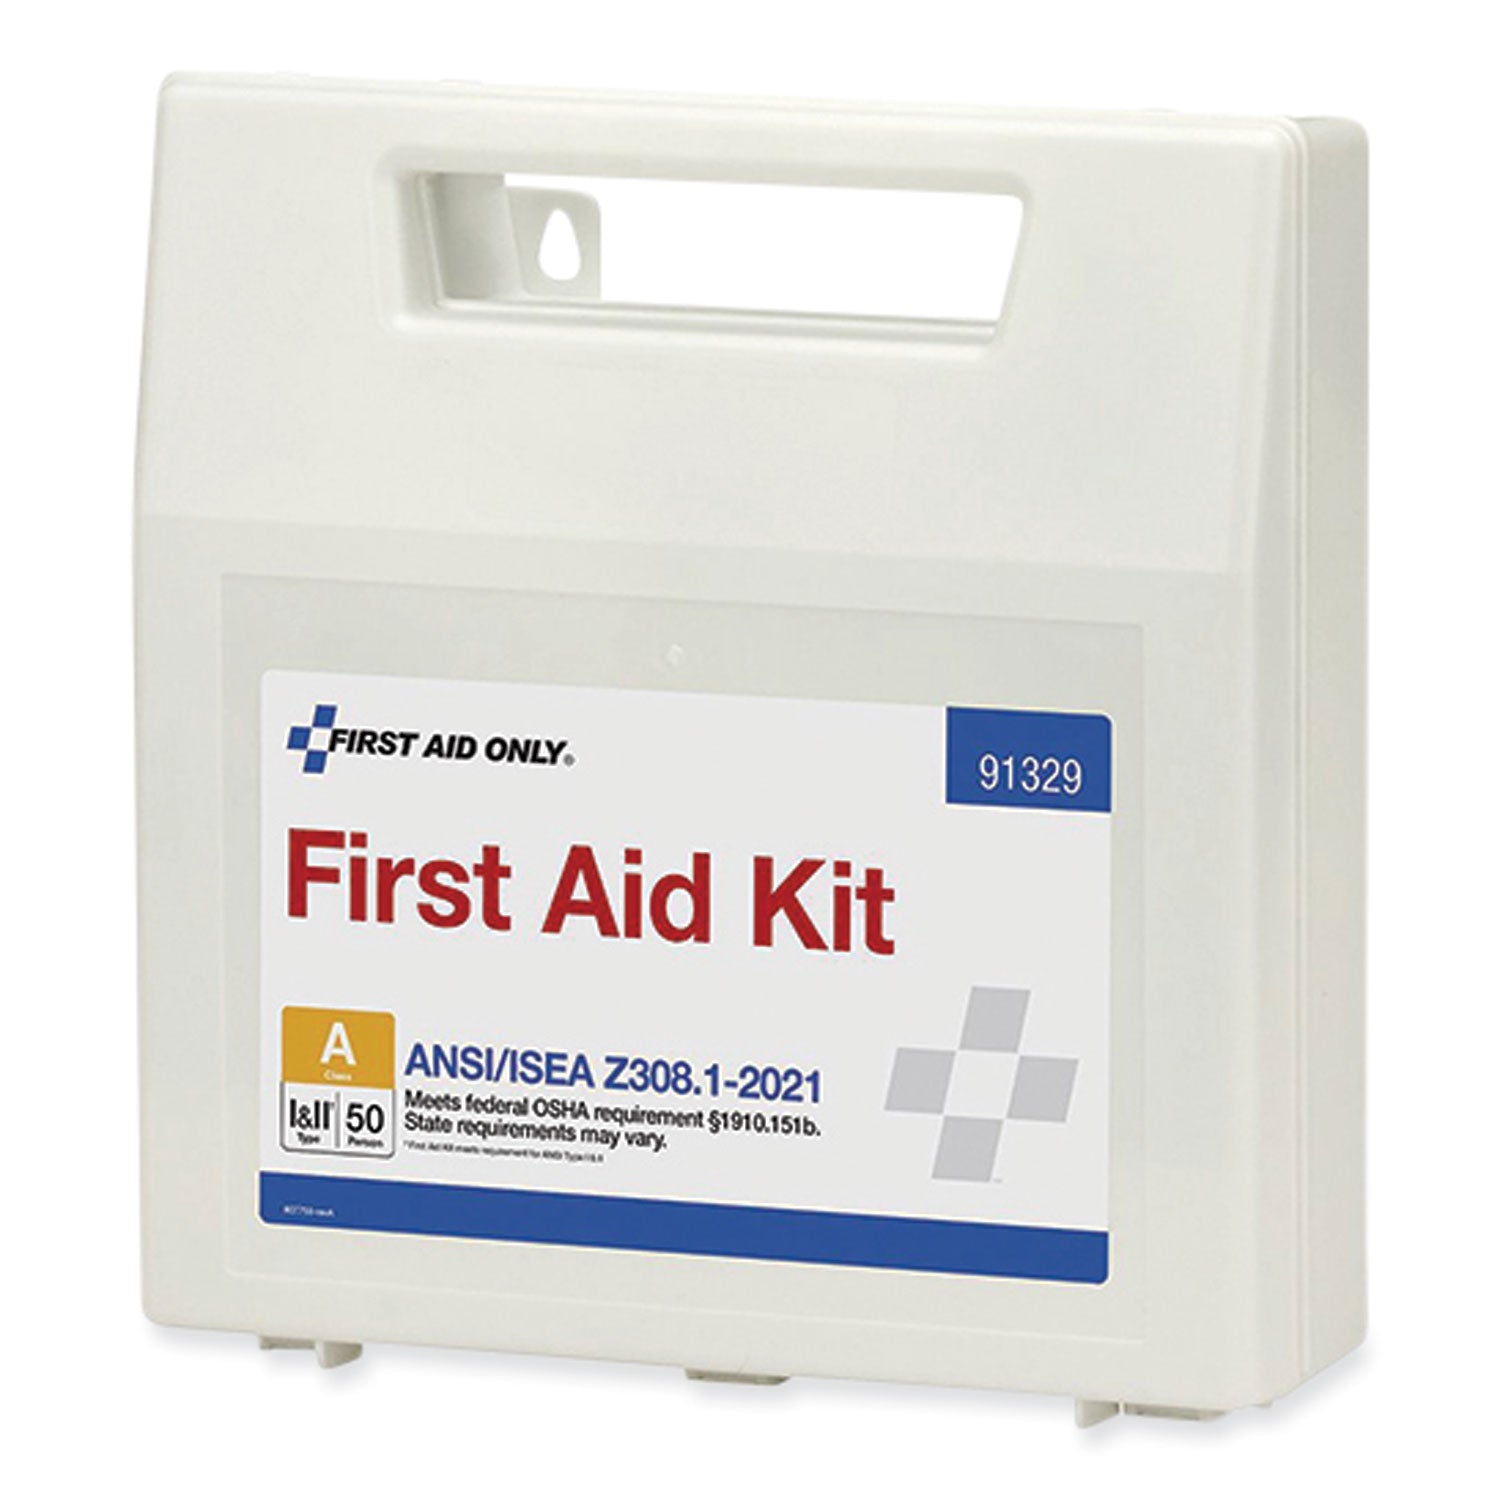 ansi-2021-first-aid-kit-for-50-people-184-pieces-plastic-case_fao91329 - 3